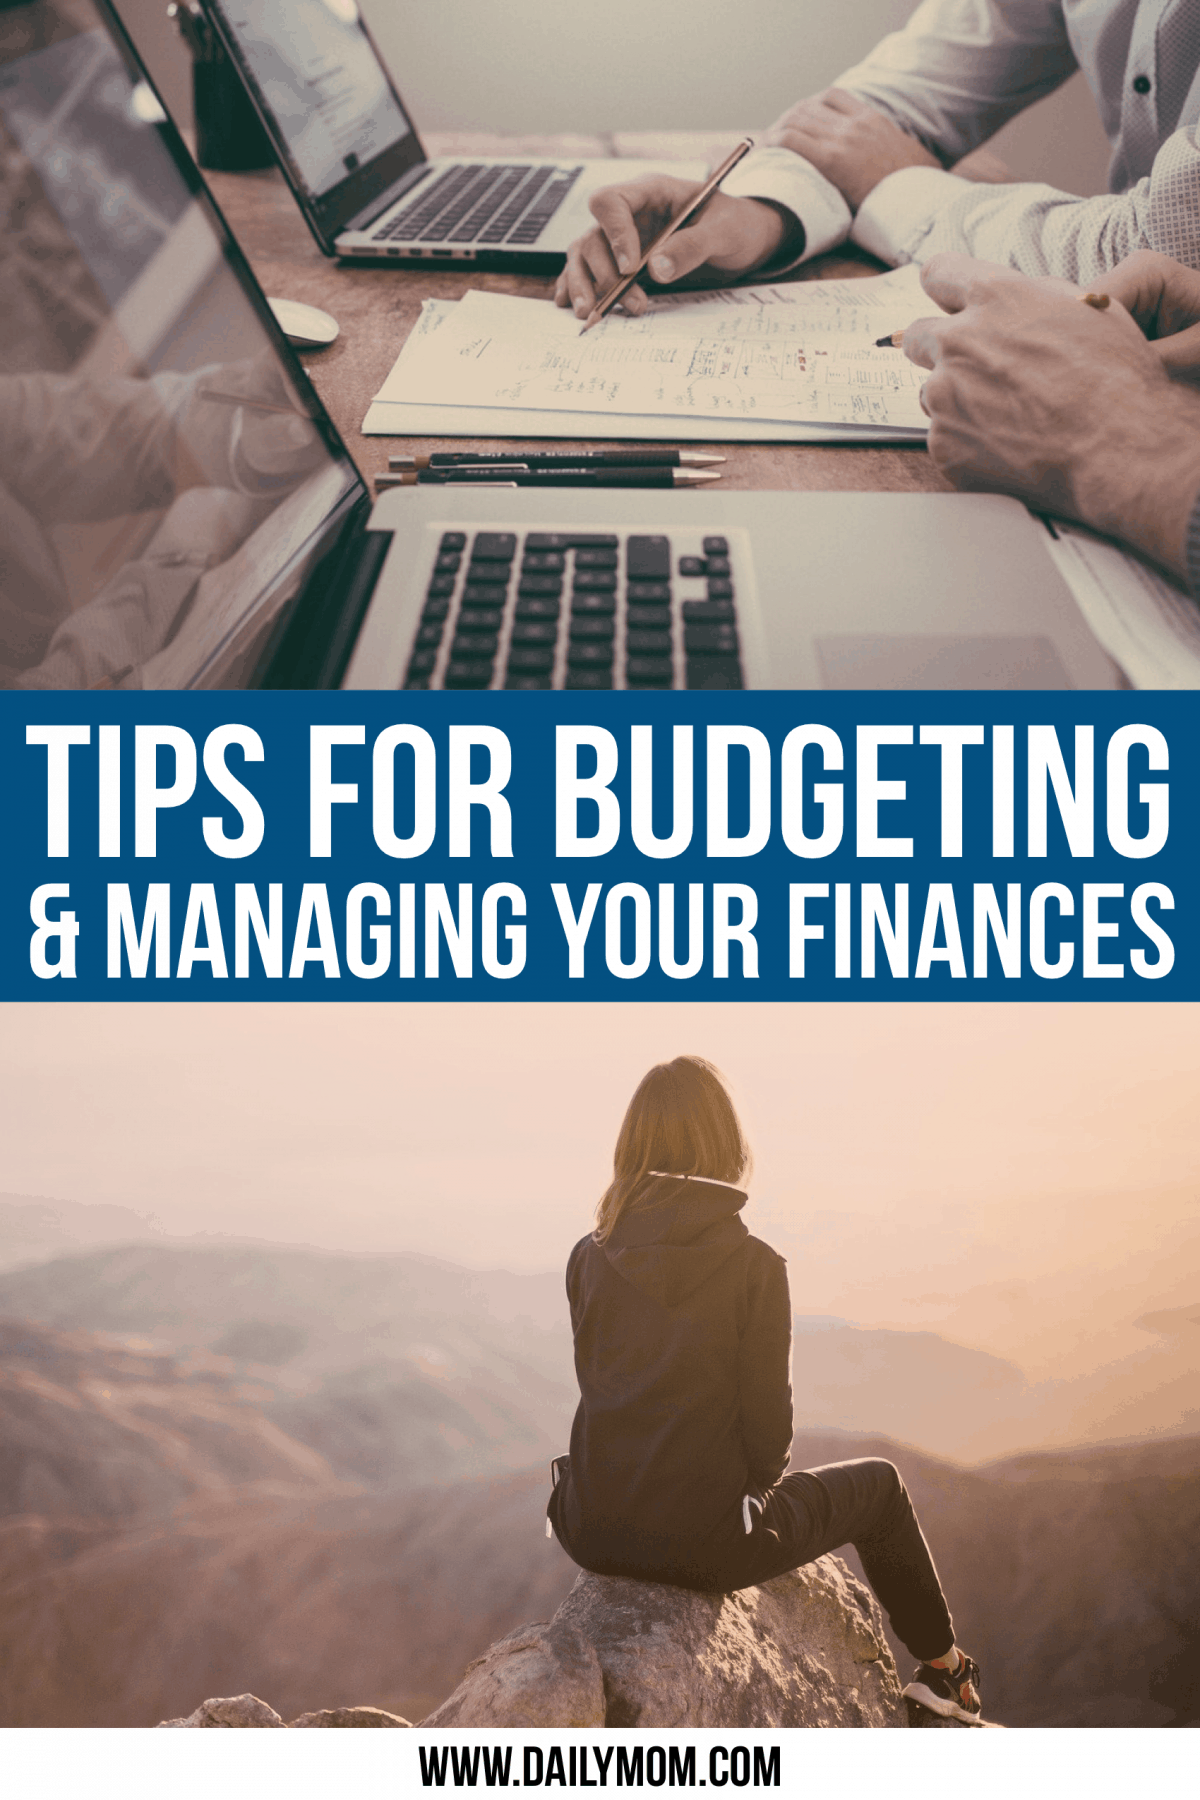 5 Helpful Tips For Budgeting This Year